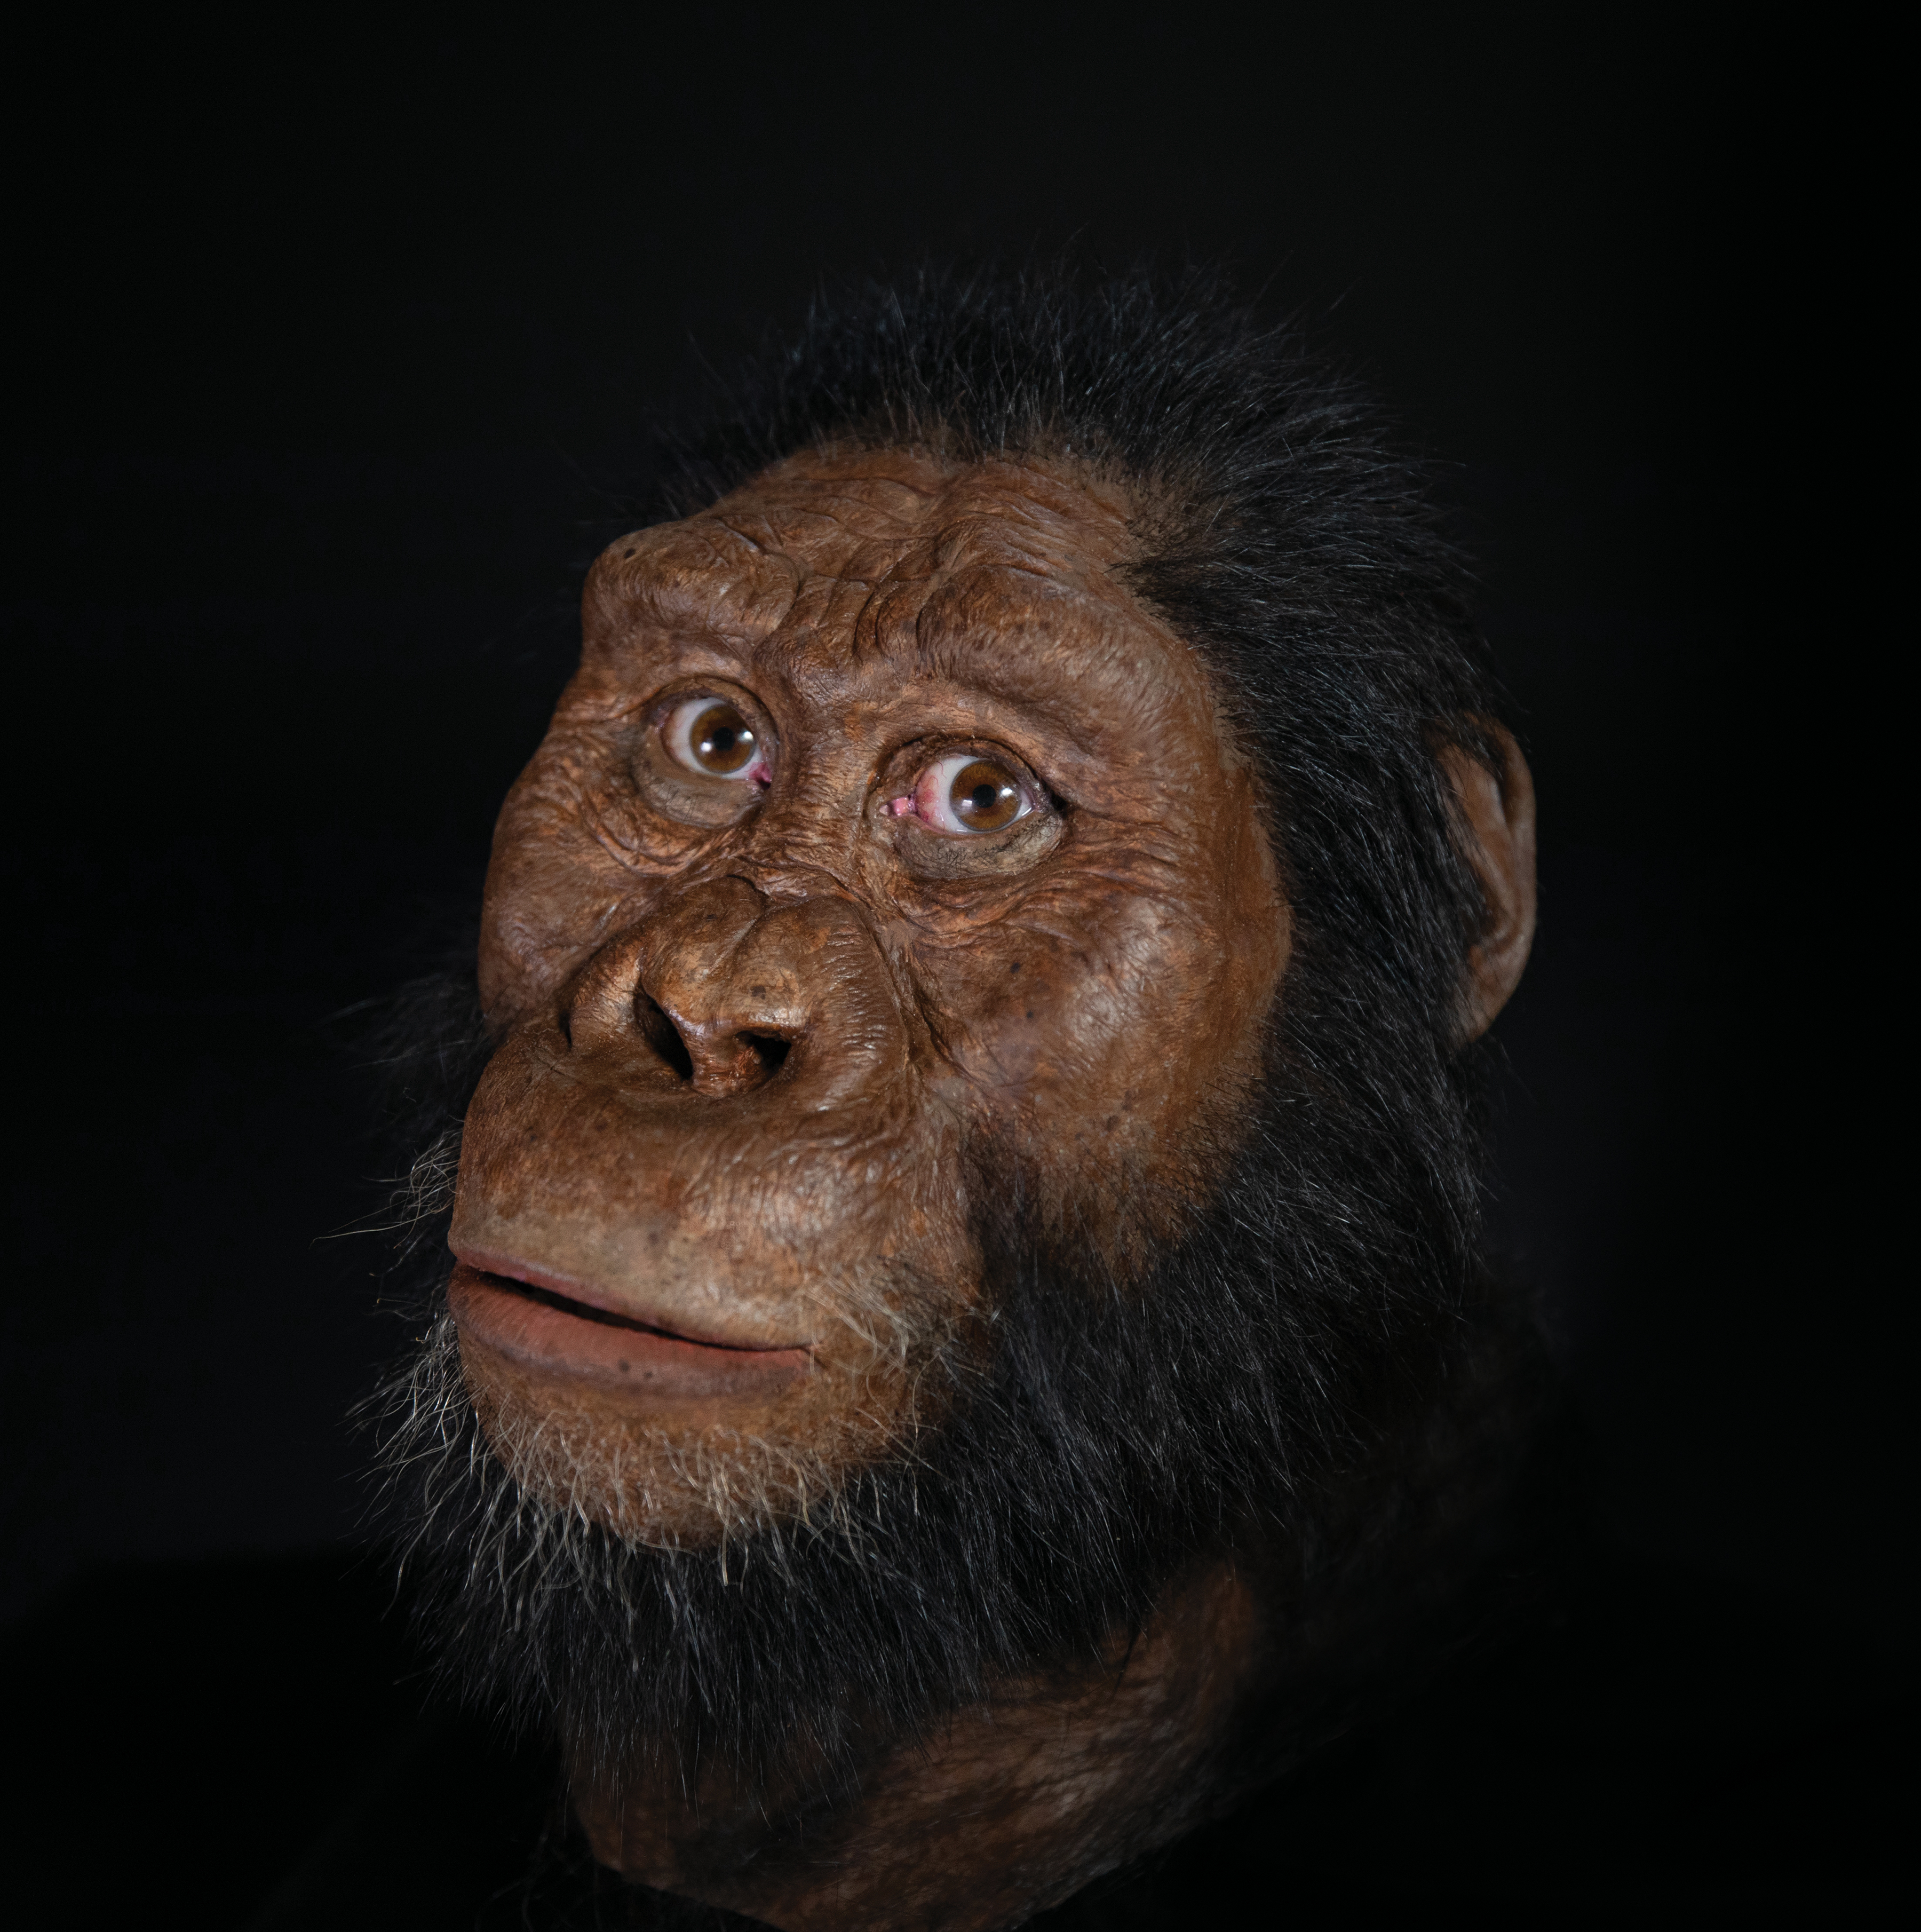 A reconstruction of the facial morphology of the 3.8 million-year-old 'MRD' specimen of Australopithecus anamensis.